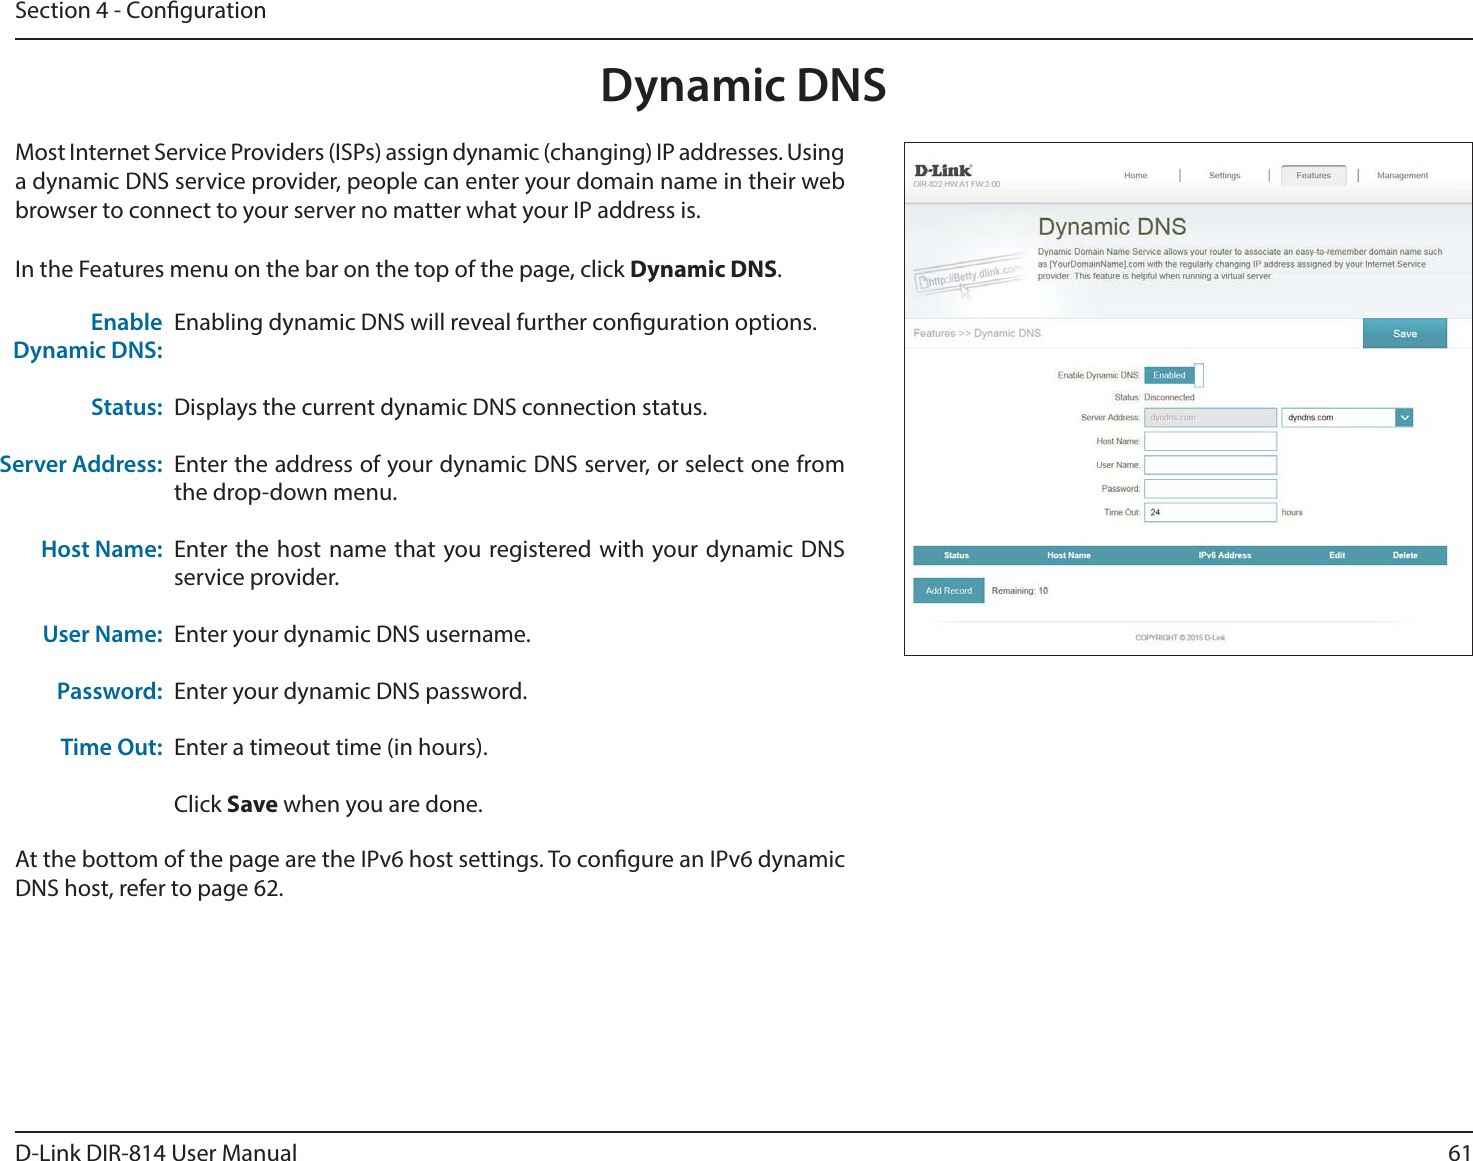 61D-Link DIR-814 User ManualSection 4 - CongurationDynamic DNSMost Internet Service Providers (ISPs) assign dynamic (changing) IP addresses. Using a dynamic DNS service provider, people can enter your domain name in their web browser to connect to your server no matter what your IP address is.In the Features menu on the bar on the top of the page, click Dynamic DNS.Enabling dynamic DNS will reveal further conguration options.Displays the current dynamic DNS connection status.Enter the address of your dynamic DNS server, or select one from the drop-down menu.Enter the host name that you registered with your dynamic DNS service provider.Enter your dynamic DNS username.Enter your dynamic DNS password.Enter a timeout time (in hours).Click Save when you are done.Enable Dynamic DNS:Status:Server Address:Host Name:User Name:Password:Time Out:At the bottom of the page are the IPv6 host settings. To congure an IPv6 dynamic DNS host, refer to page 62.